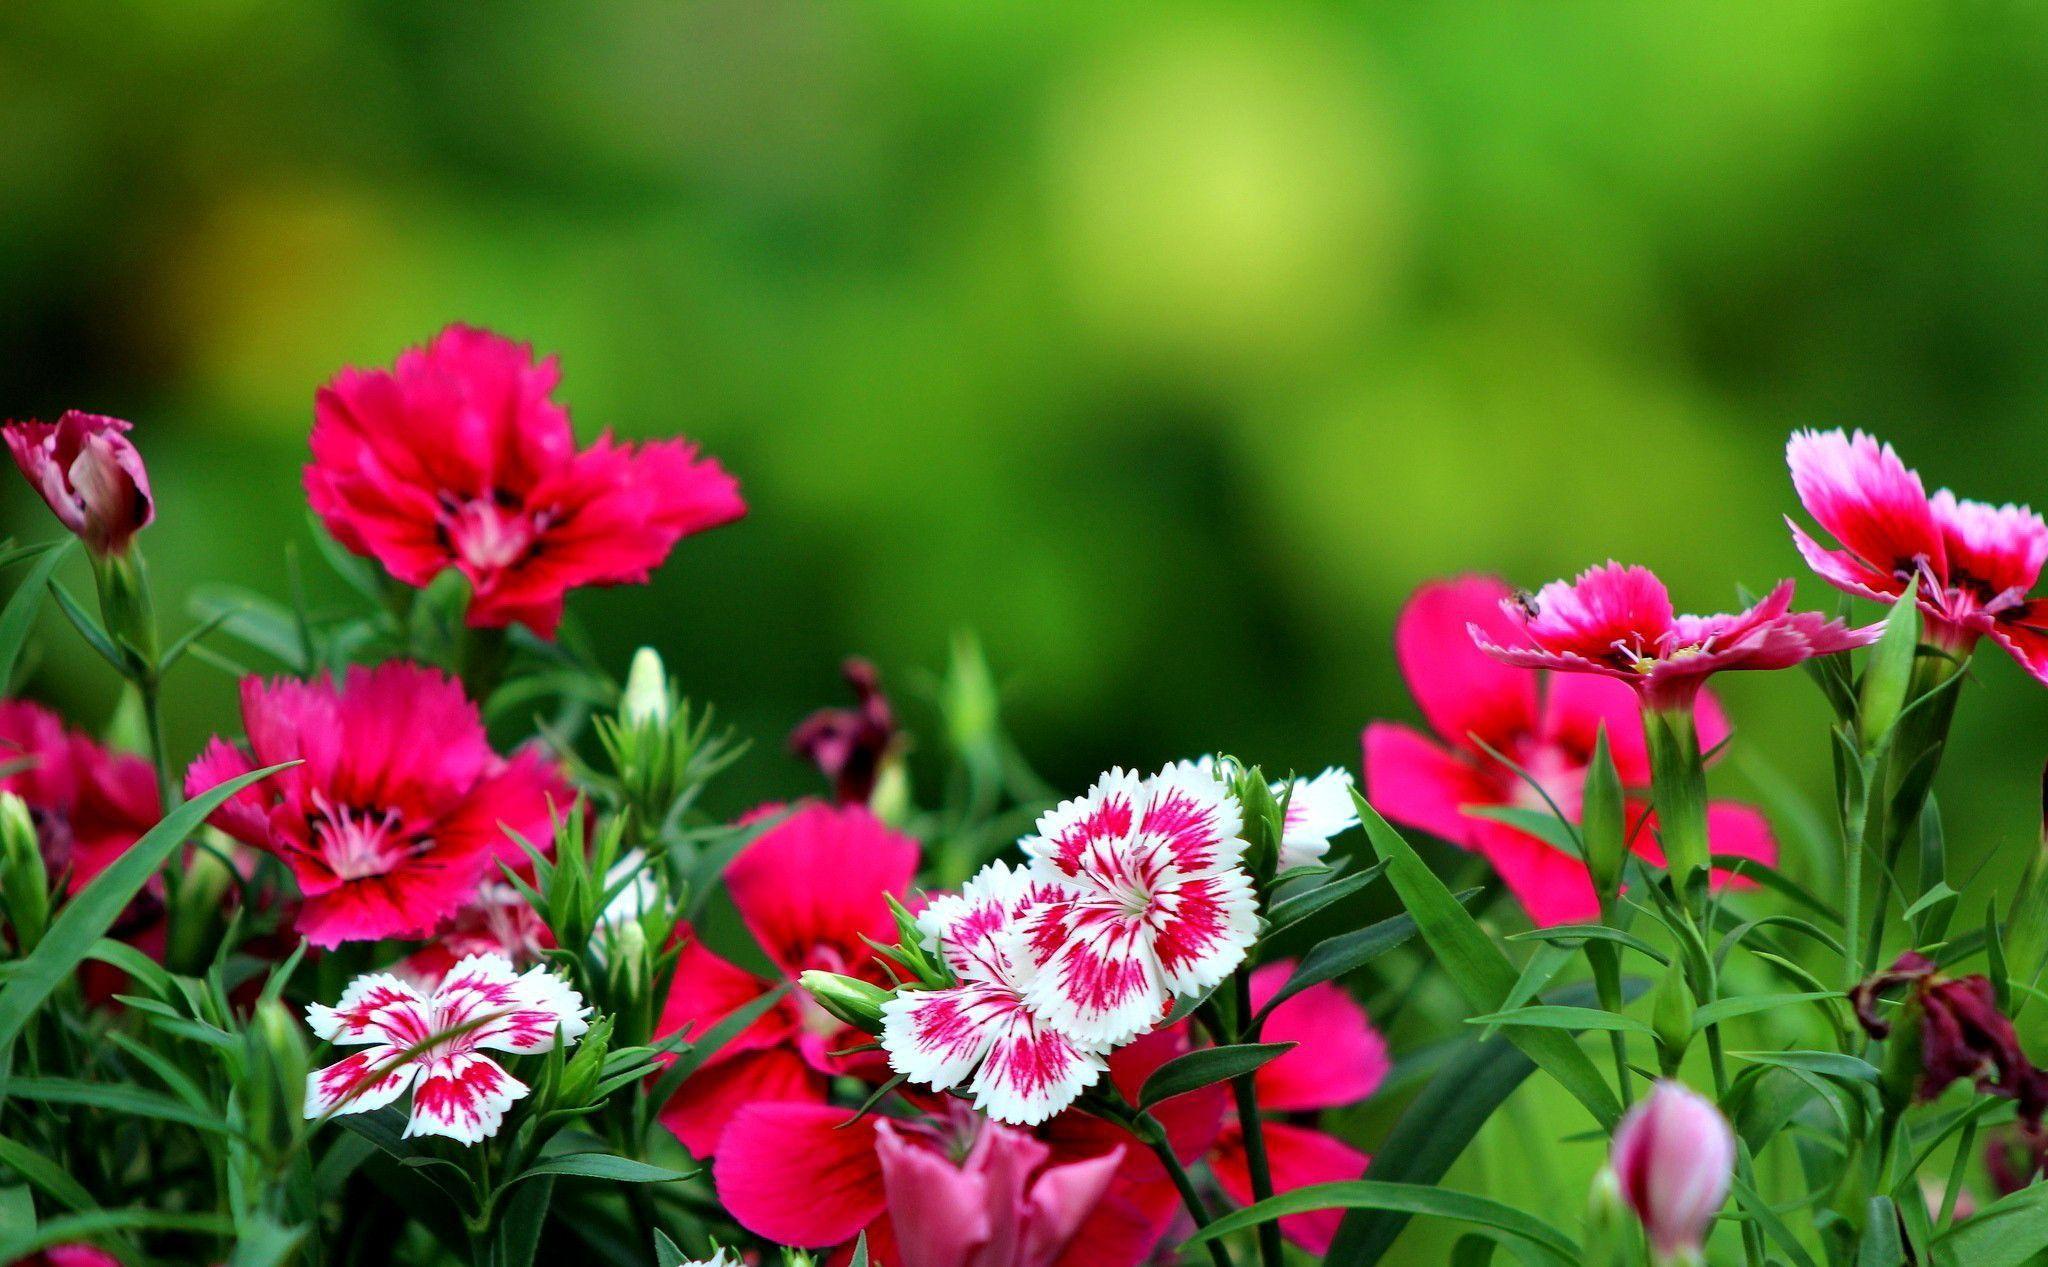 Pictures Of Flowers For Desktop Backgrounds - Wallpaper Cave